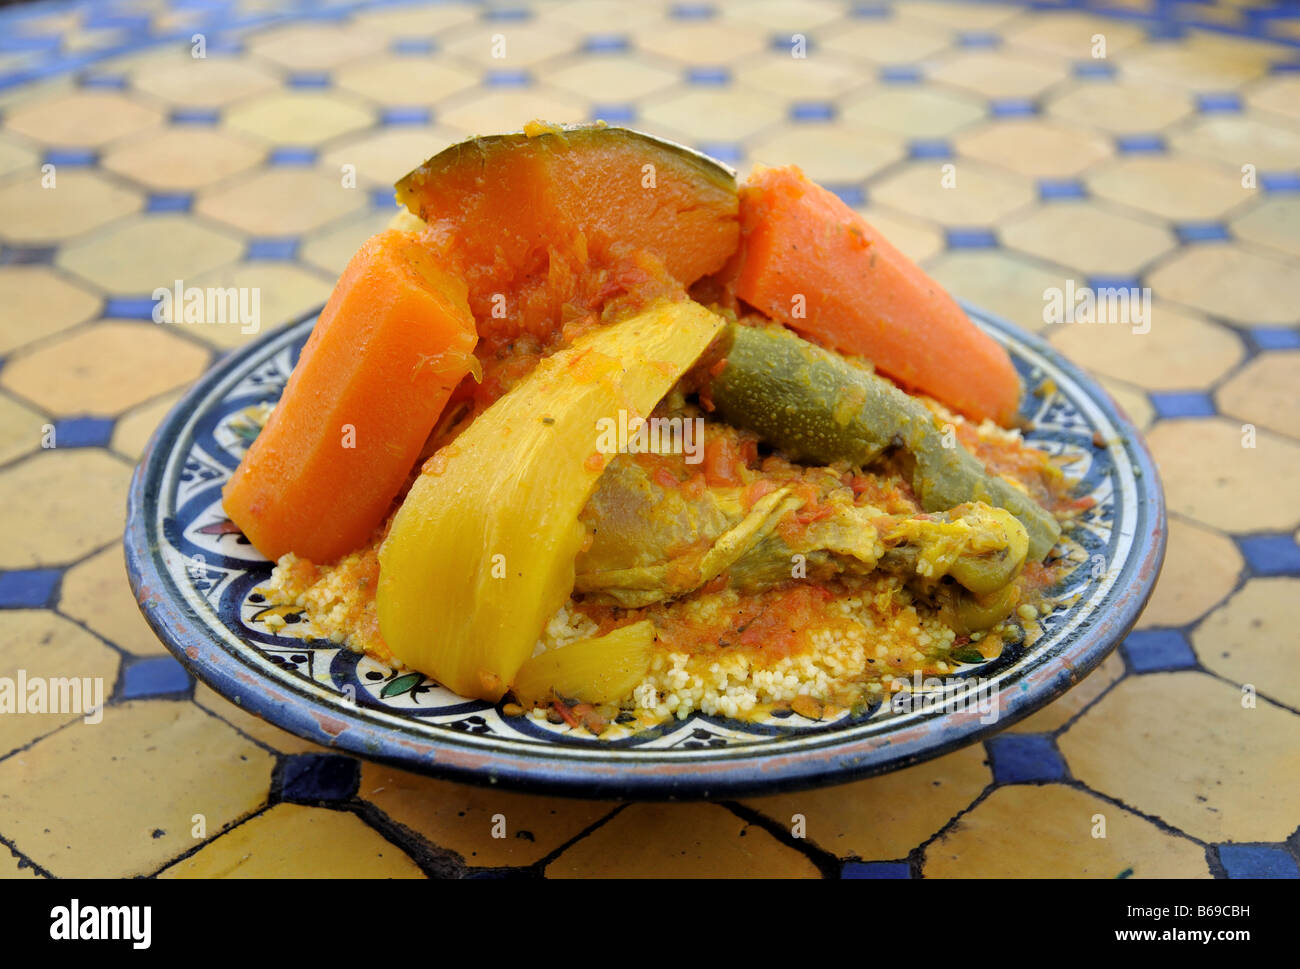 Couscous with vegetables and chicken as served in Marrakech, Morocco Stock Photo